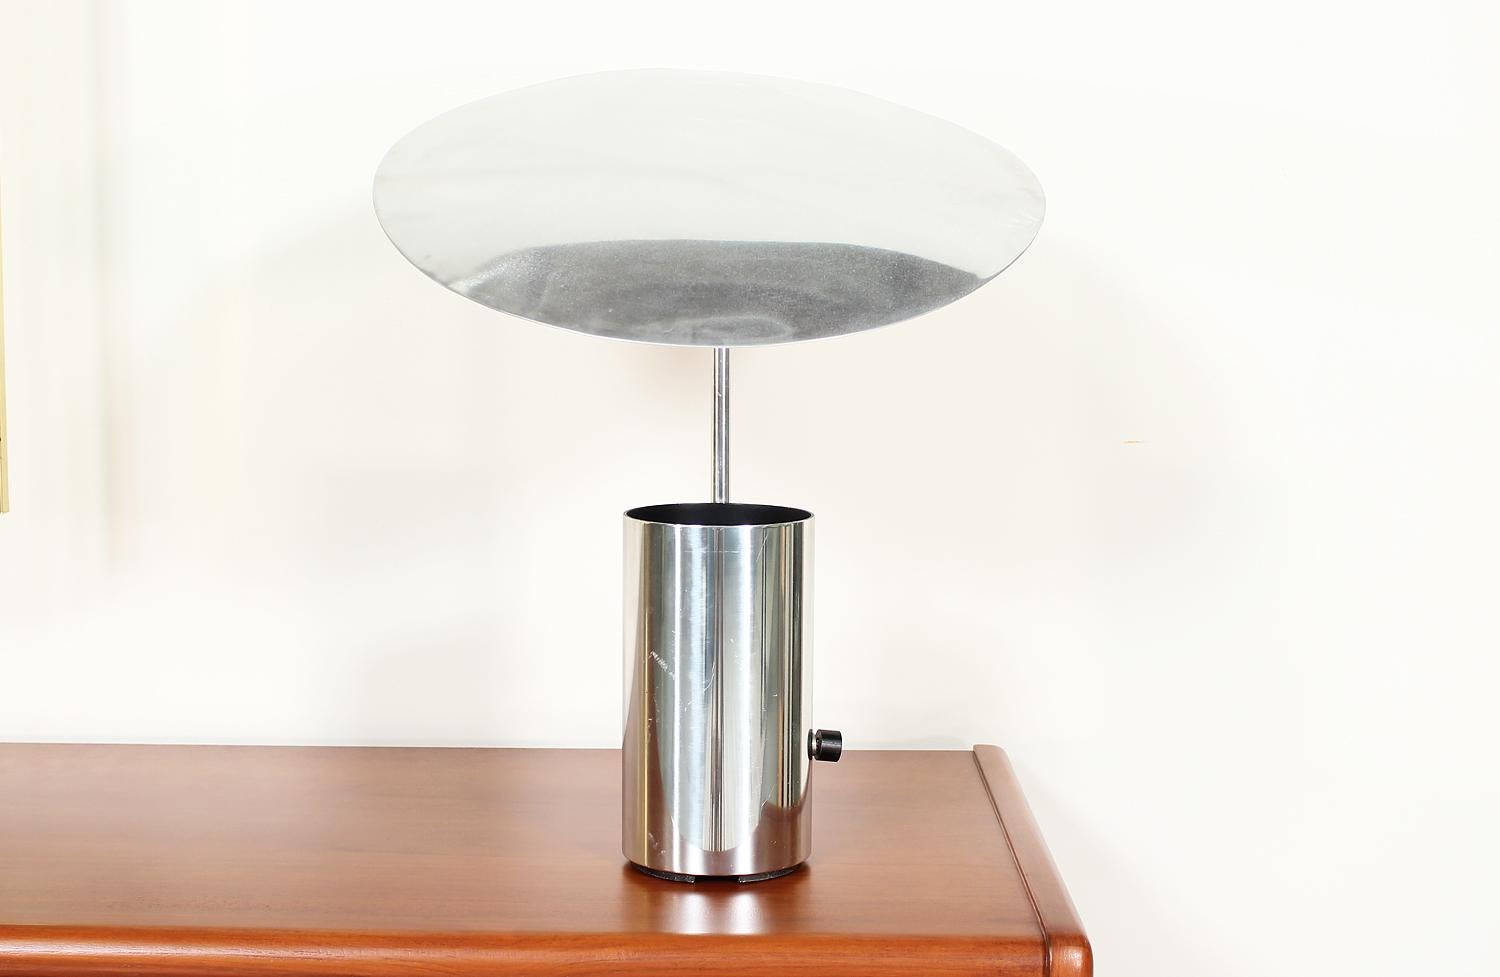 American George Nelson “Half-Nelson” Chrome Reflector Lamp for Koch & Lowy